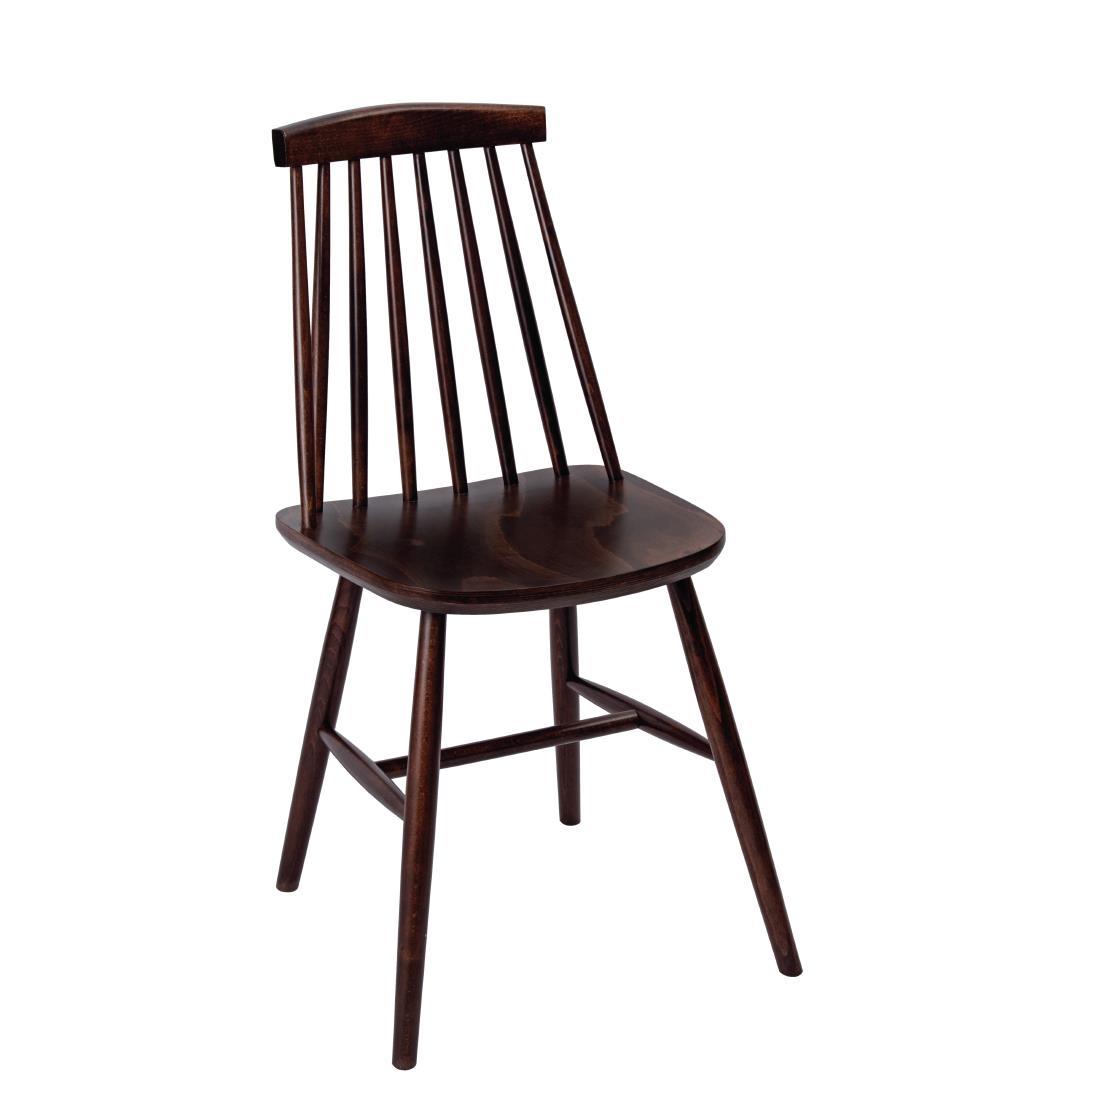 Fameg Farmhouse Angled Side Chairs Walnut Effect (Pack of 2) - DC352  - 1